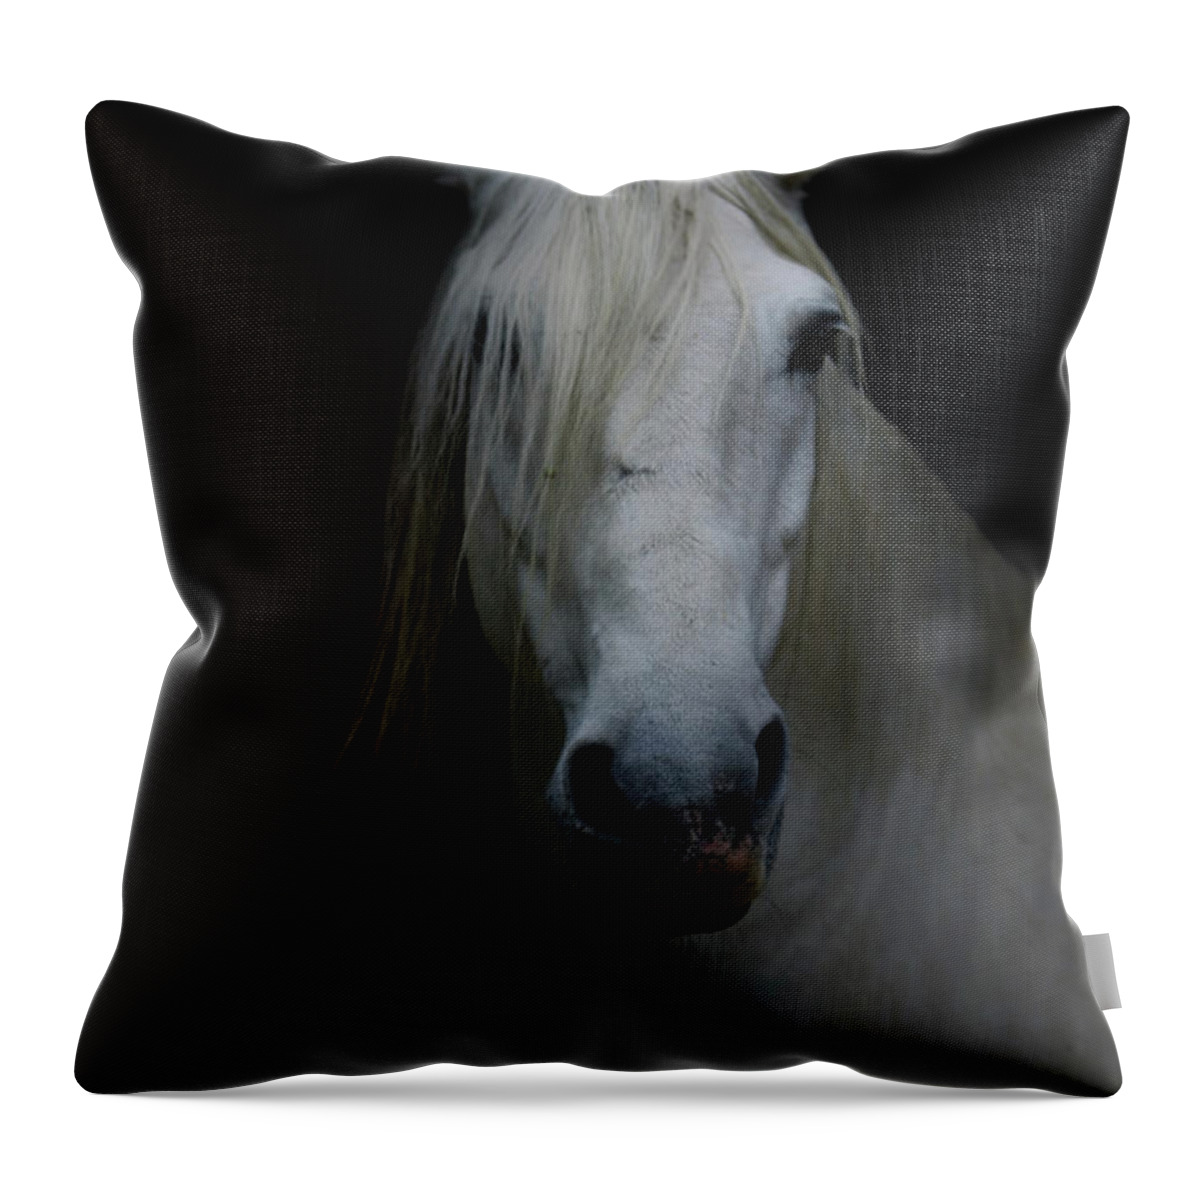 Horse Throw Pillow featuring the photograph White Horse In Shadow by Christiana Stawski